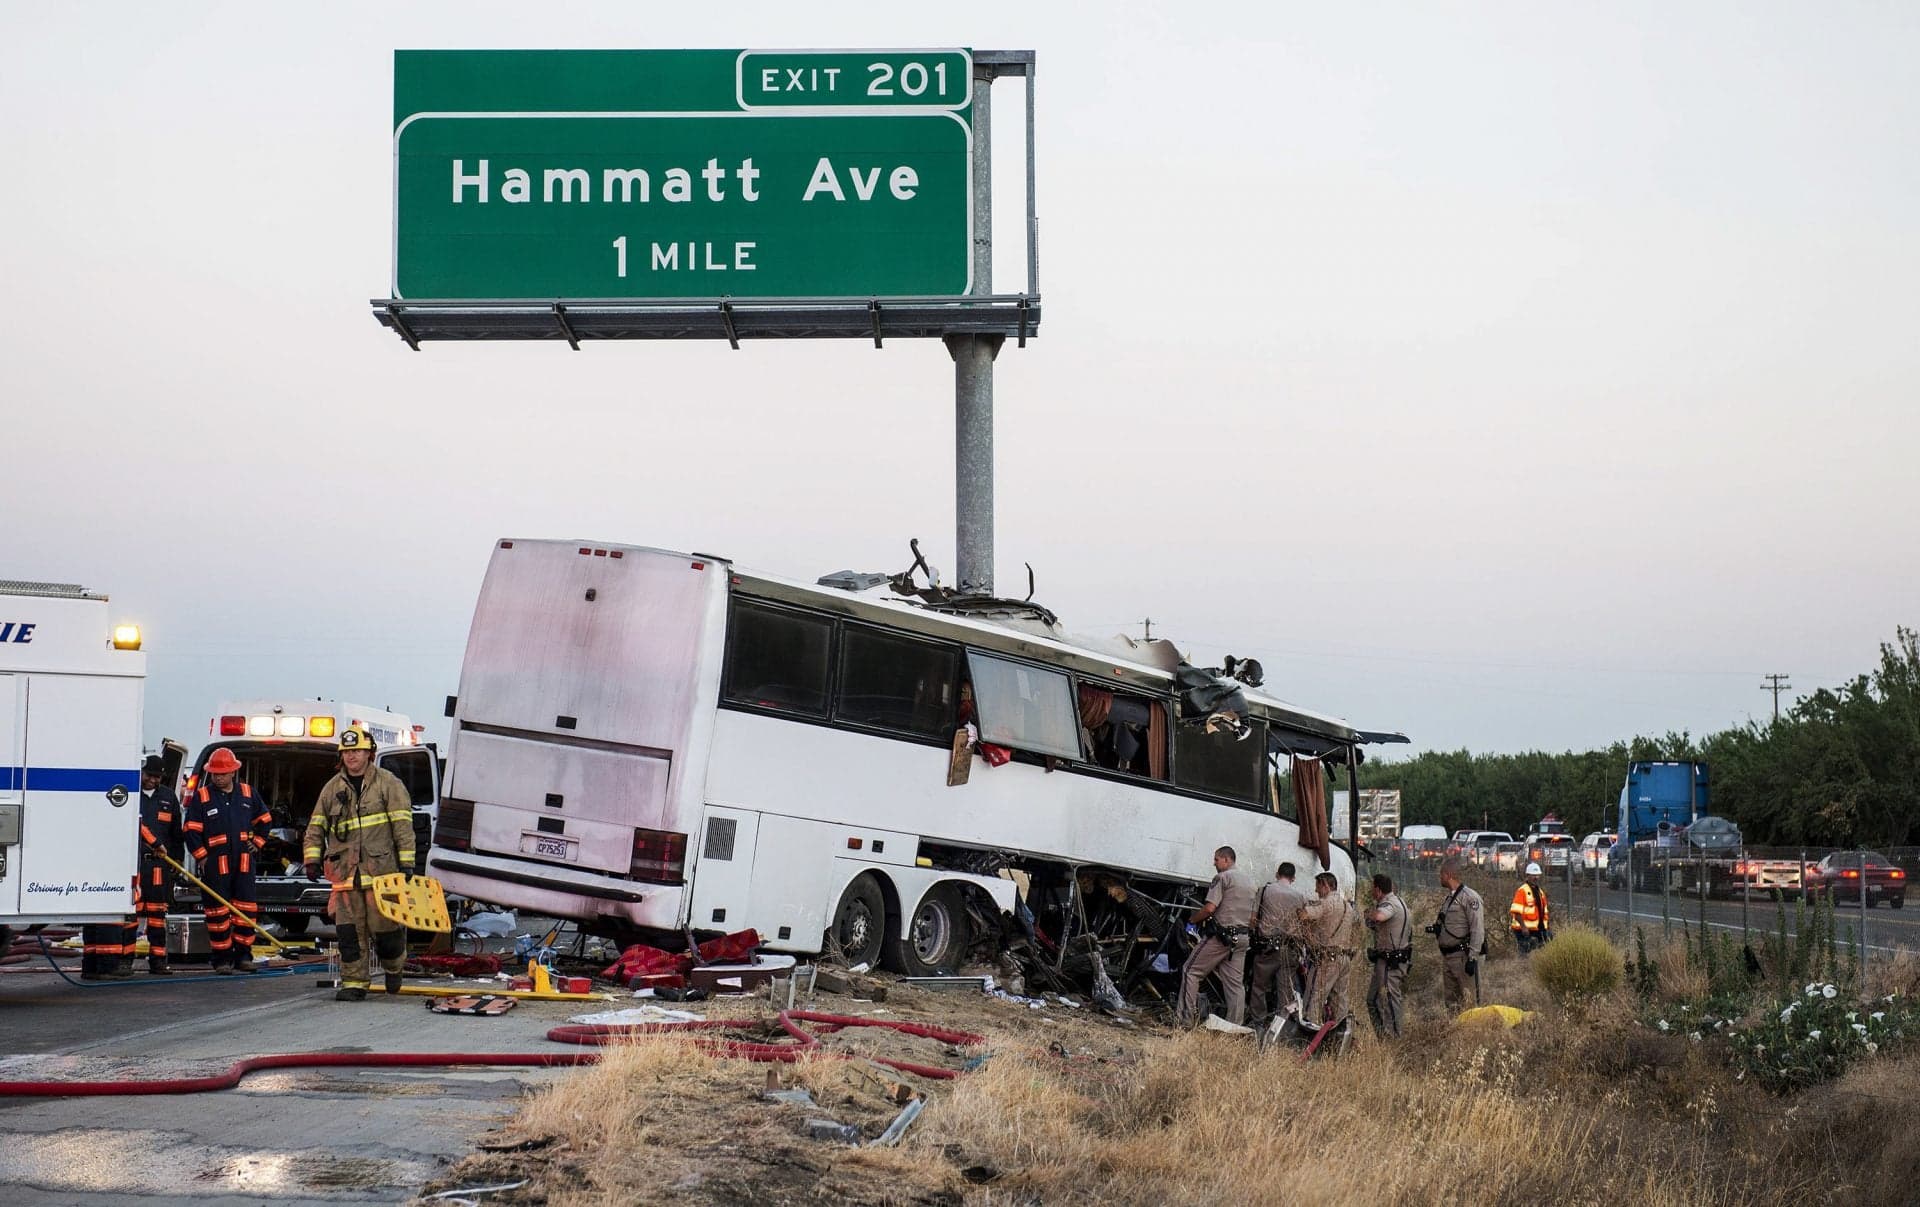 NTSB: Federal Regulator Failed to Keep Dangerous Operator Off the Road